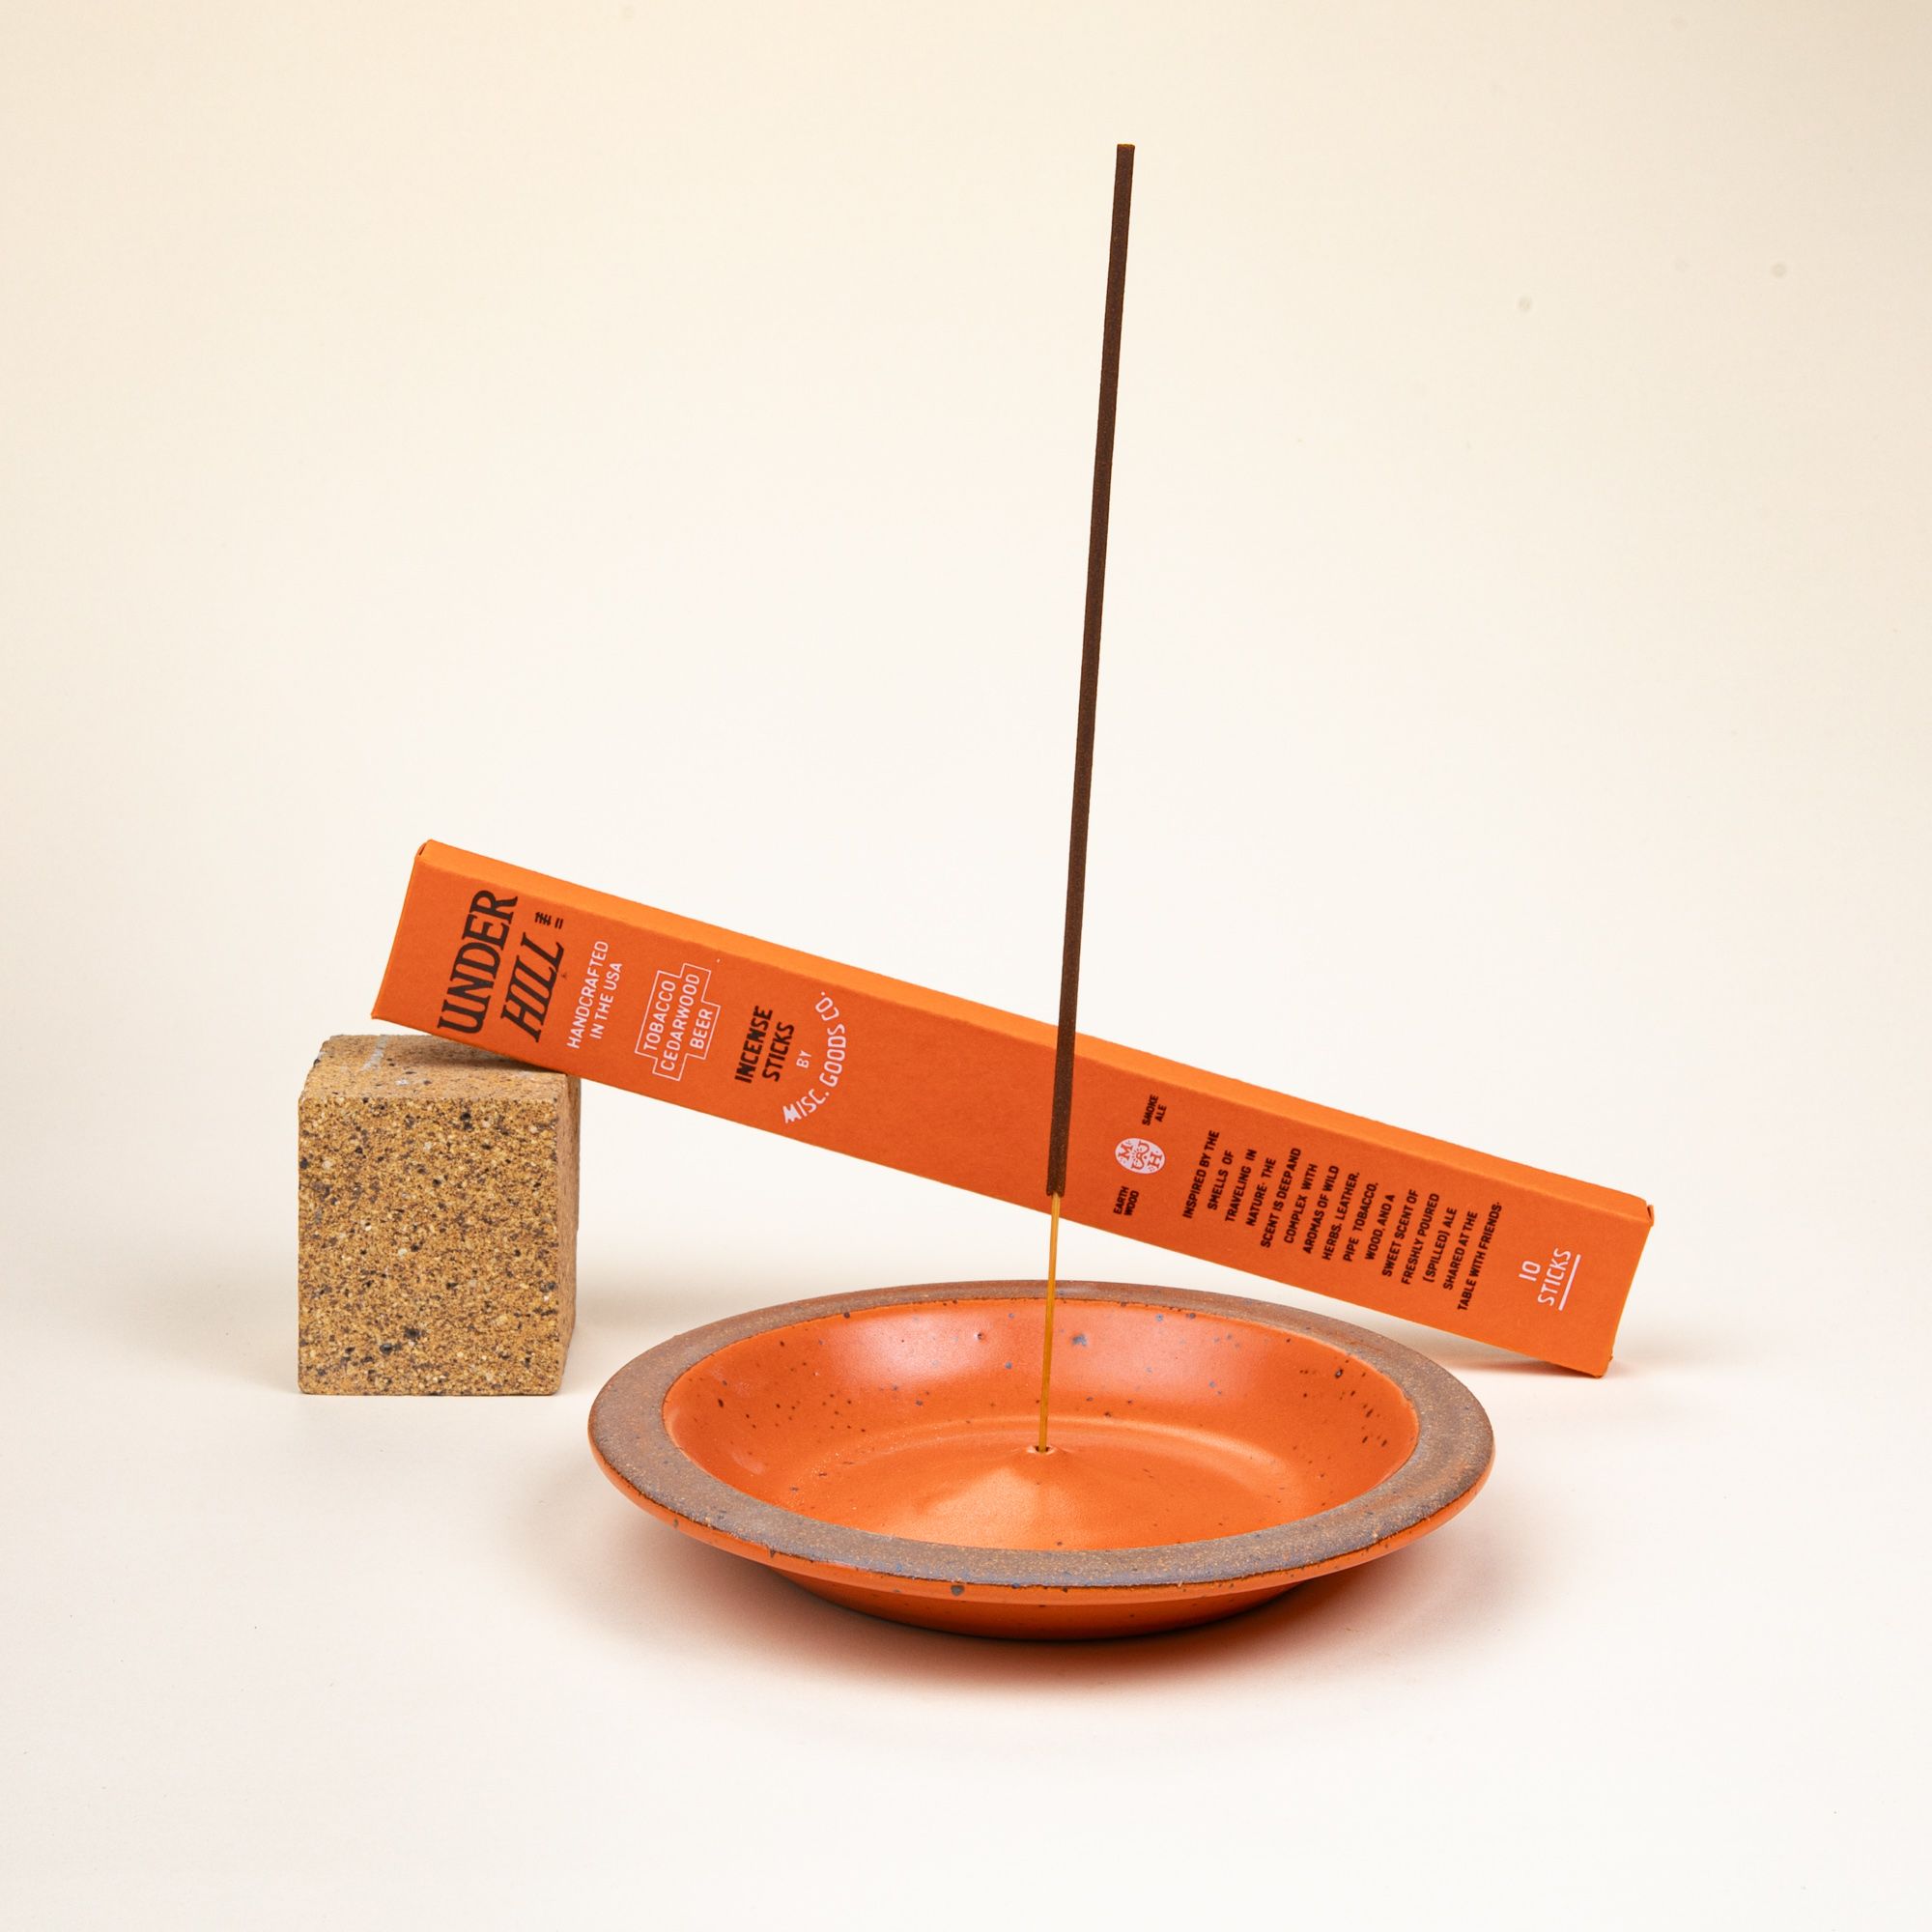 An incense stick sits in a ceramic plate-shaped incense stick holder with an unglazed rim and glazed in a bold orange color featuring lots of iron speckles. Behind the holder is a propped-up rectangular box of incense sticks.